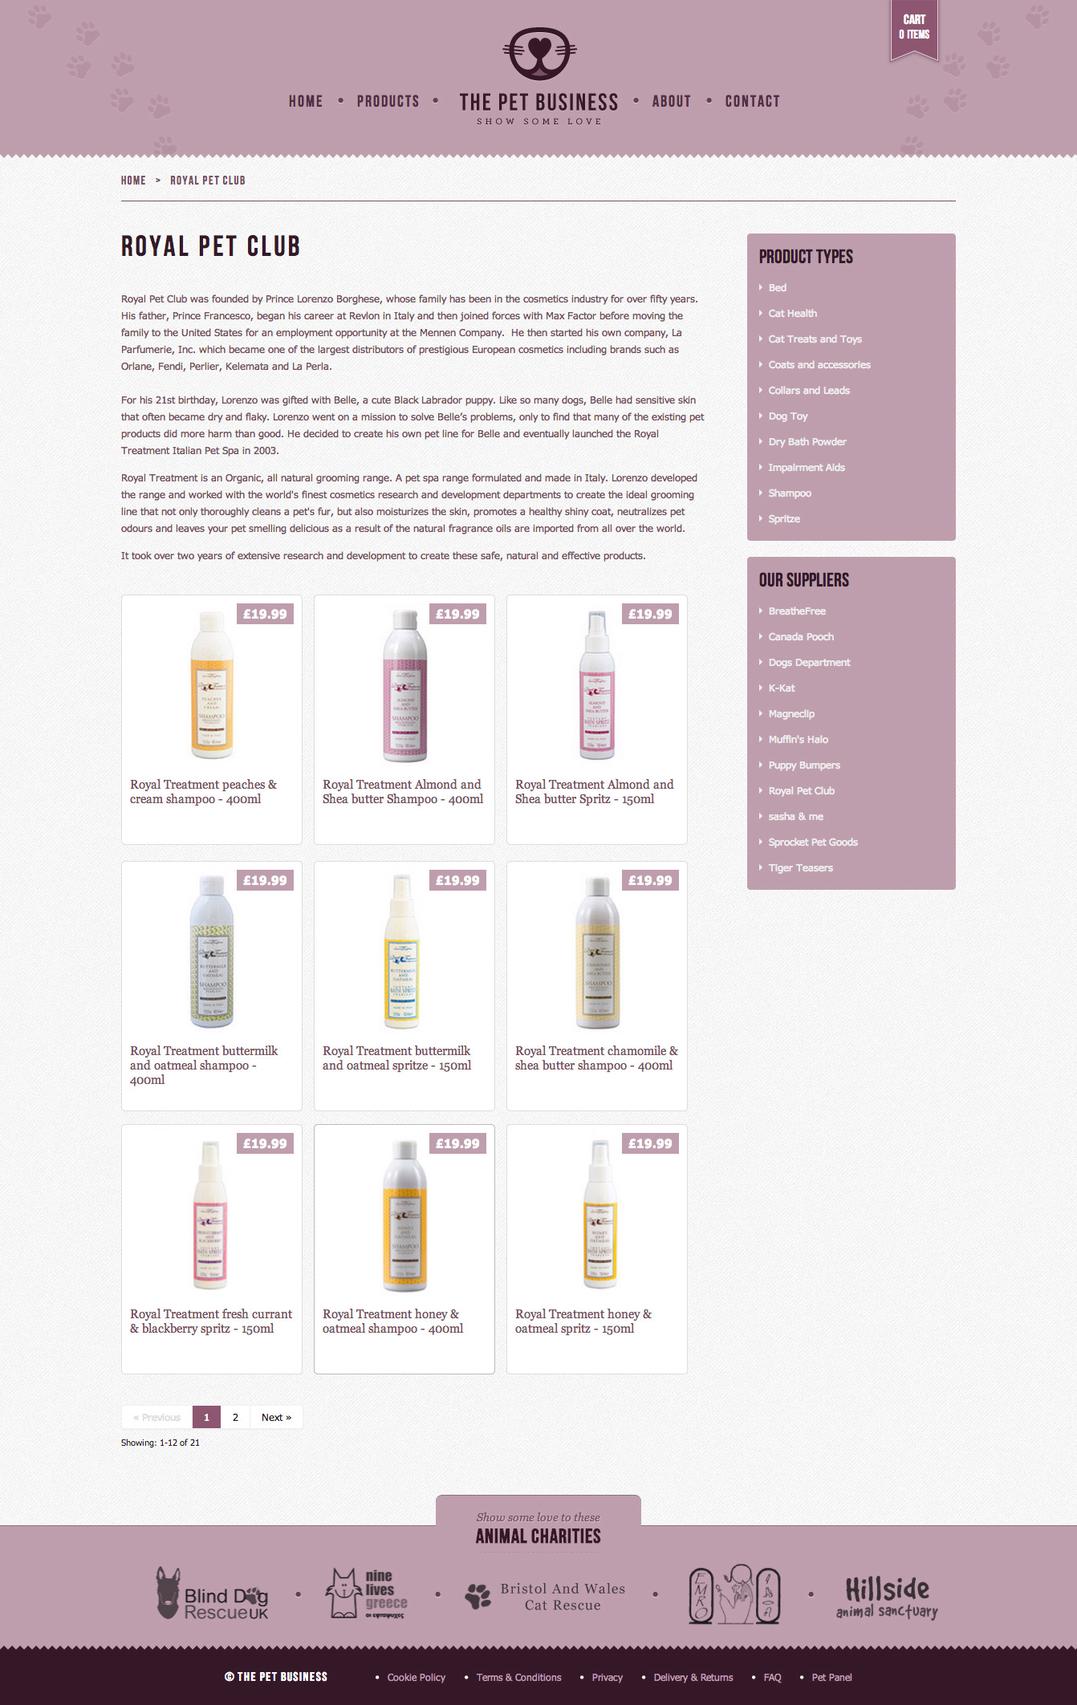 The Pet Business products page, showing a grid of products and filters.